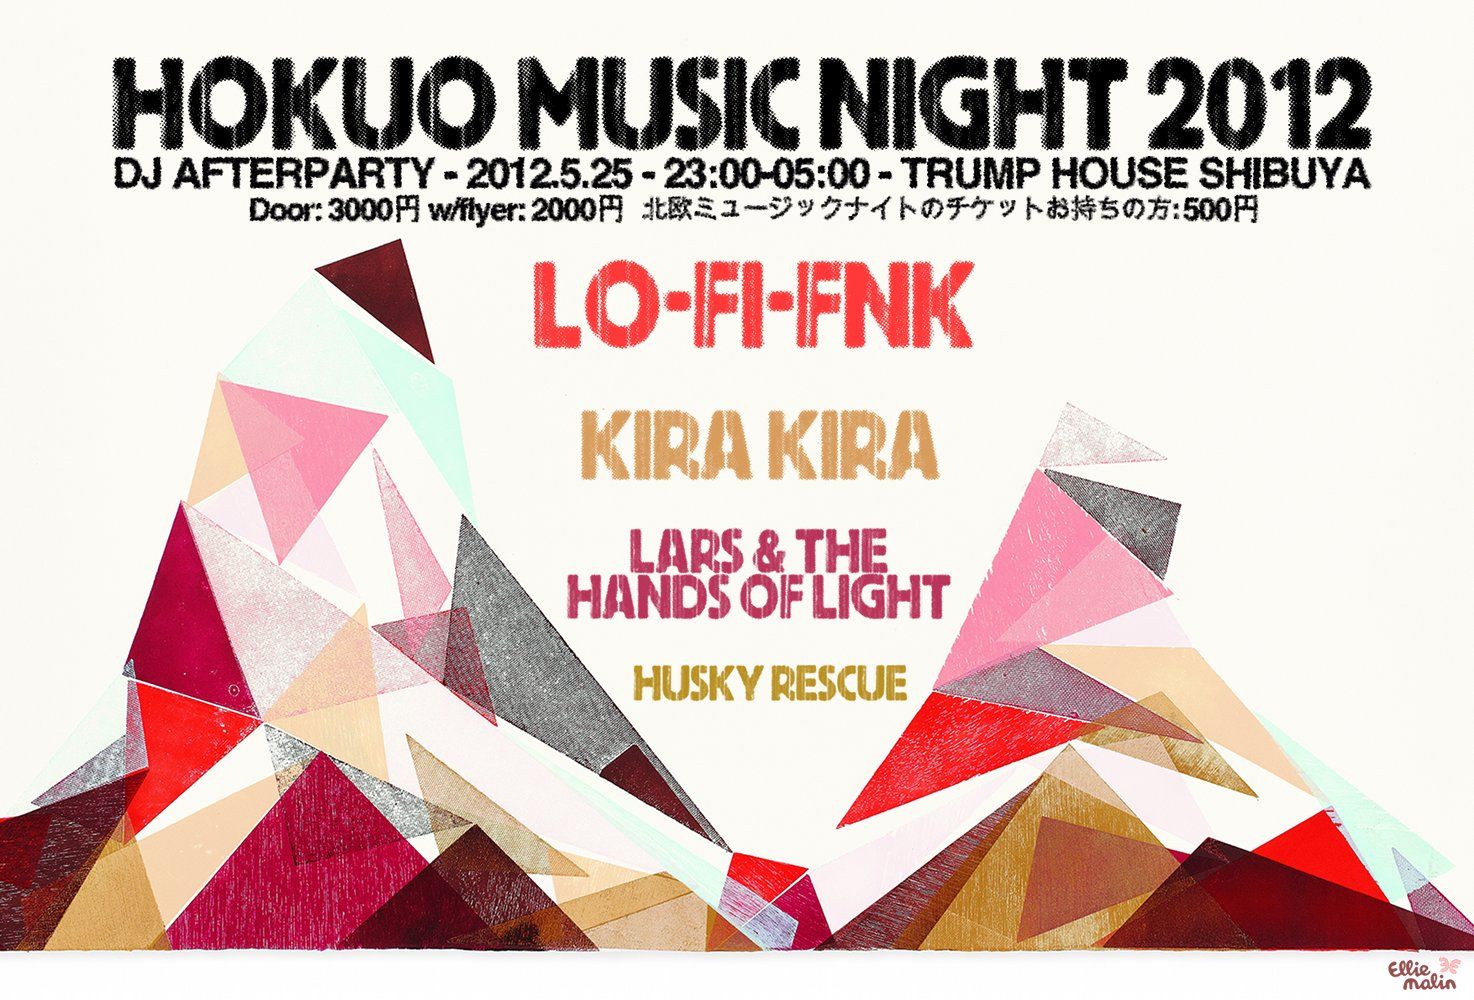 LO-FI-FNK @ Hokuo Music Night After Party Main Image